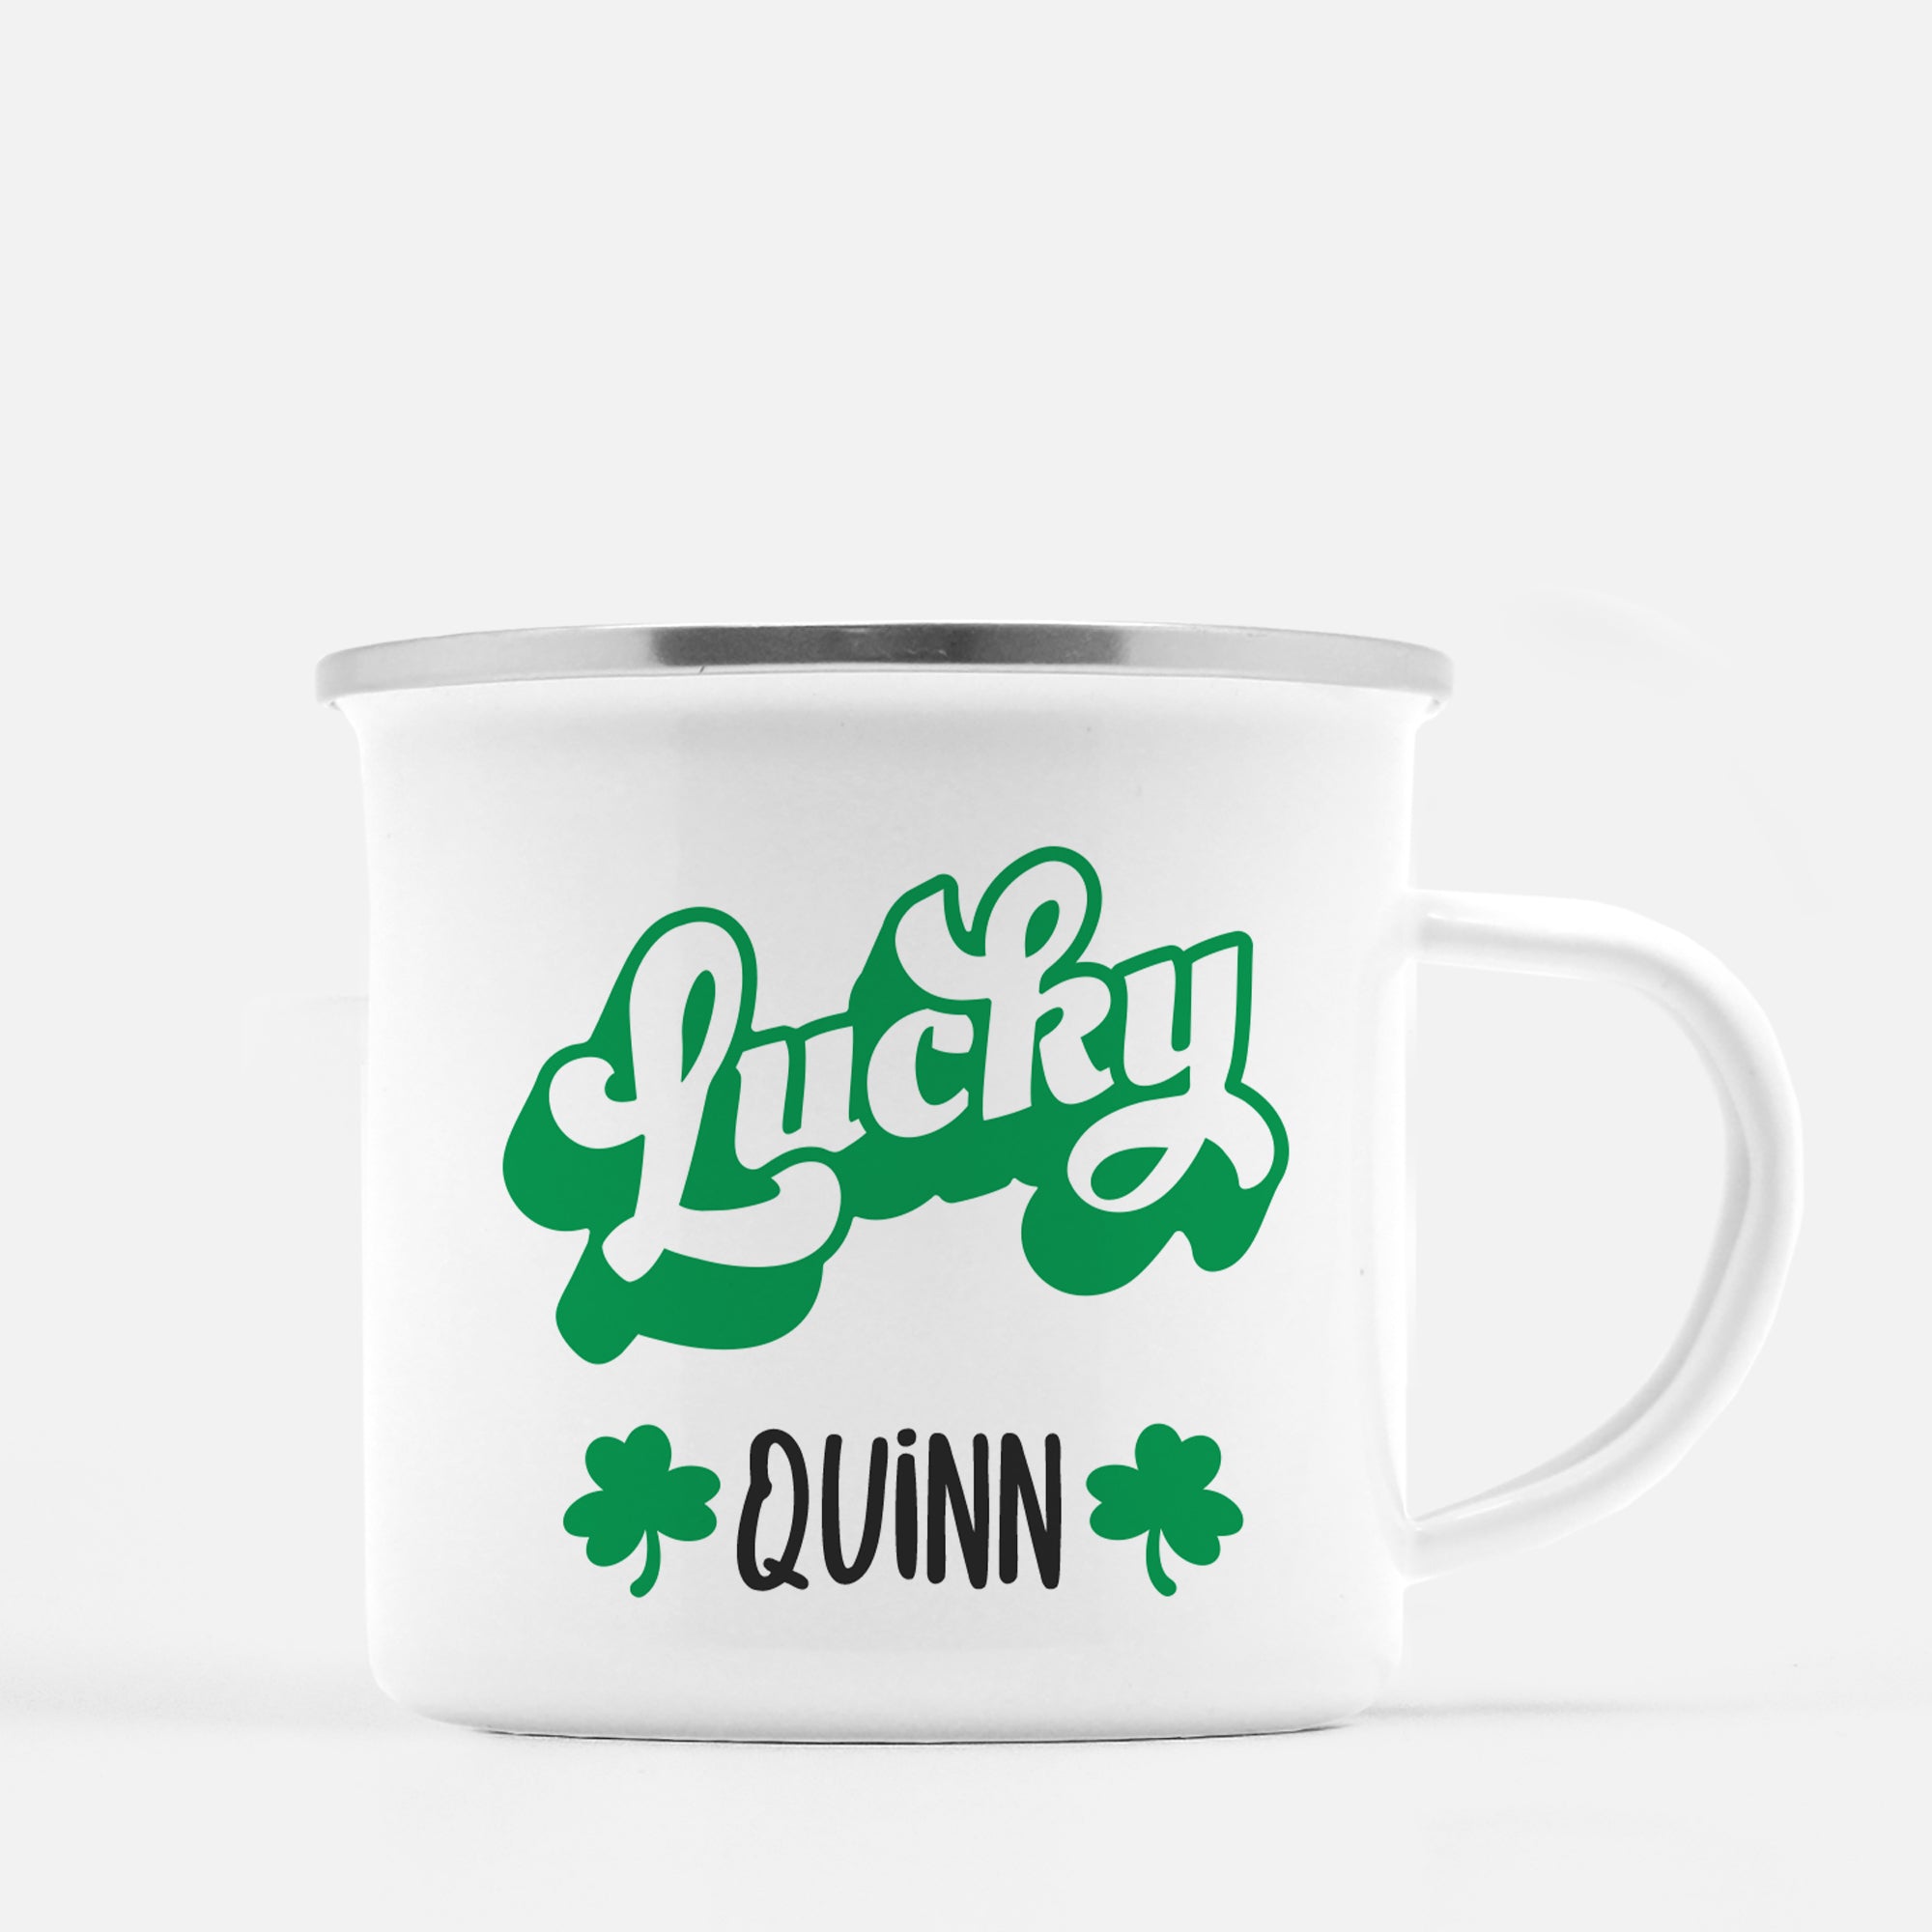 Lucky! Personalized Happy St. Patrick's Day12 oz metal camp mug.  Silver lip, white enamel, dishwasher safe, design printed on both sides.  unbreakable Pipsy.com